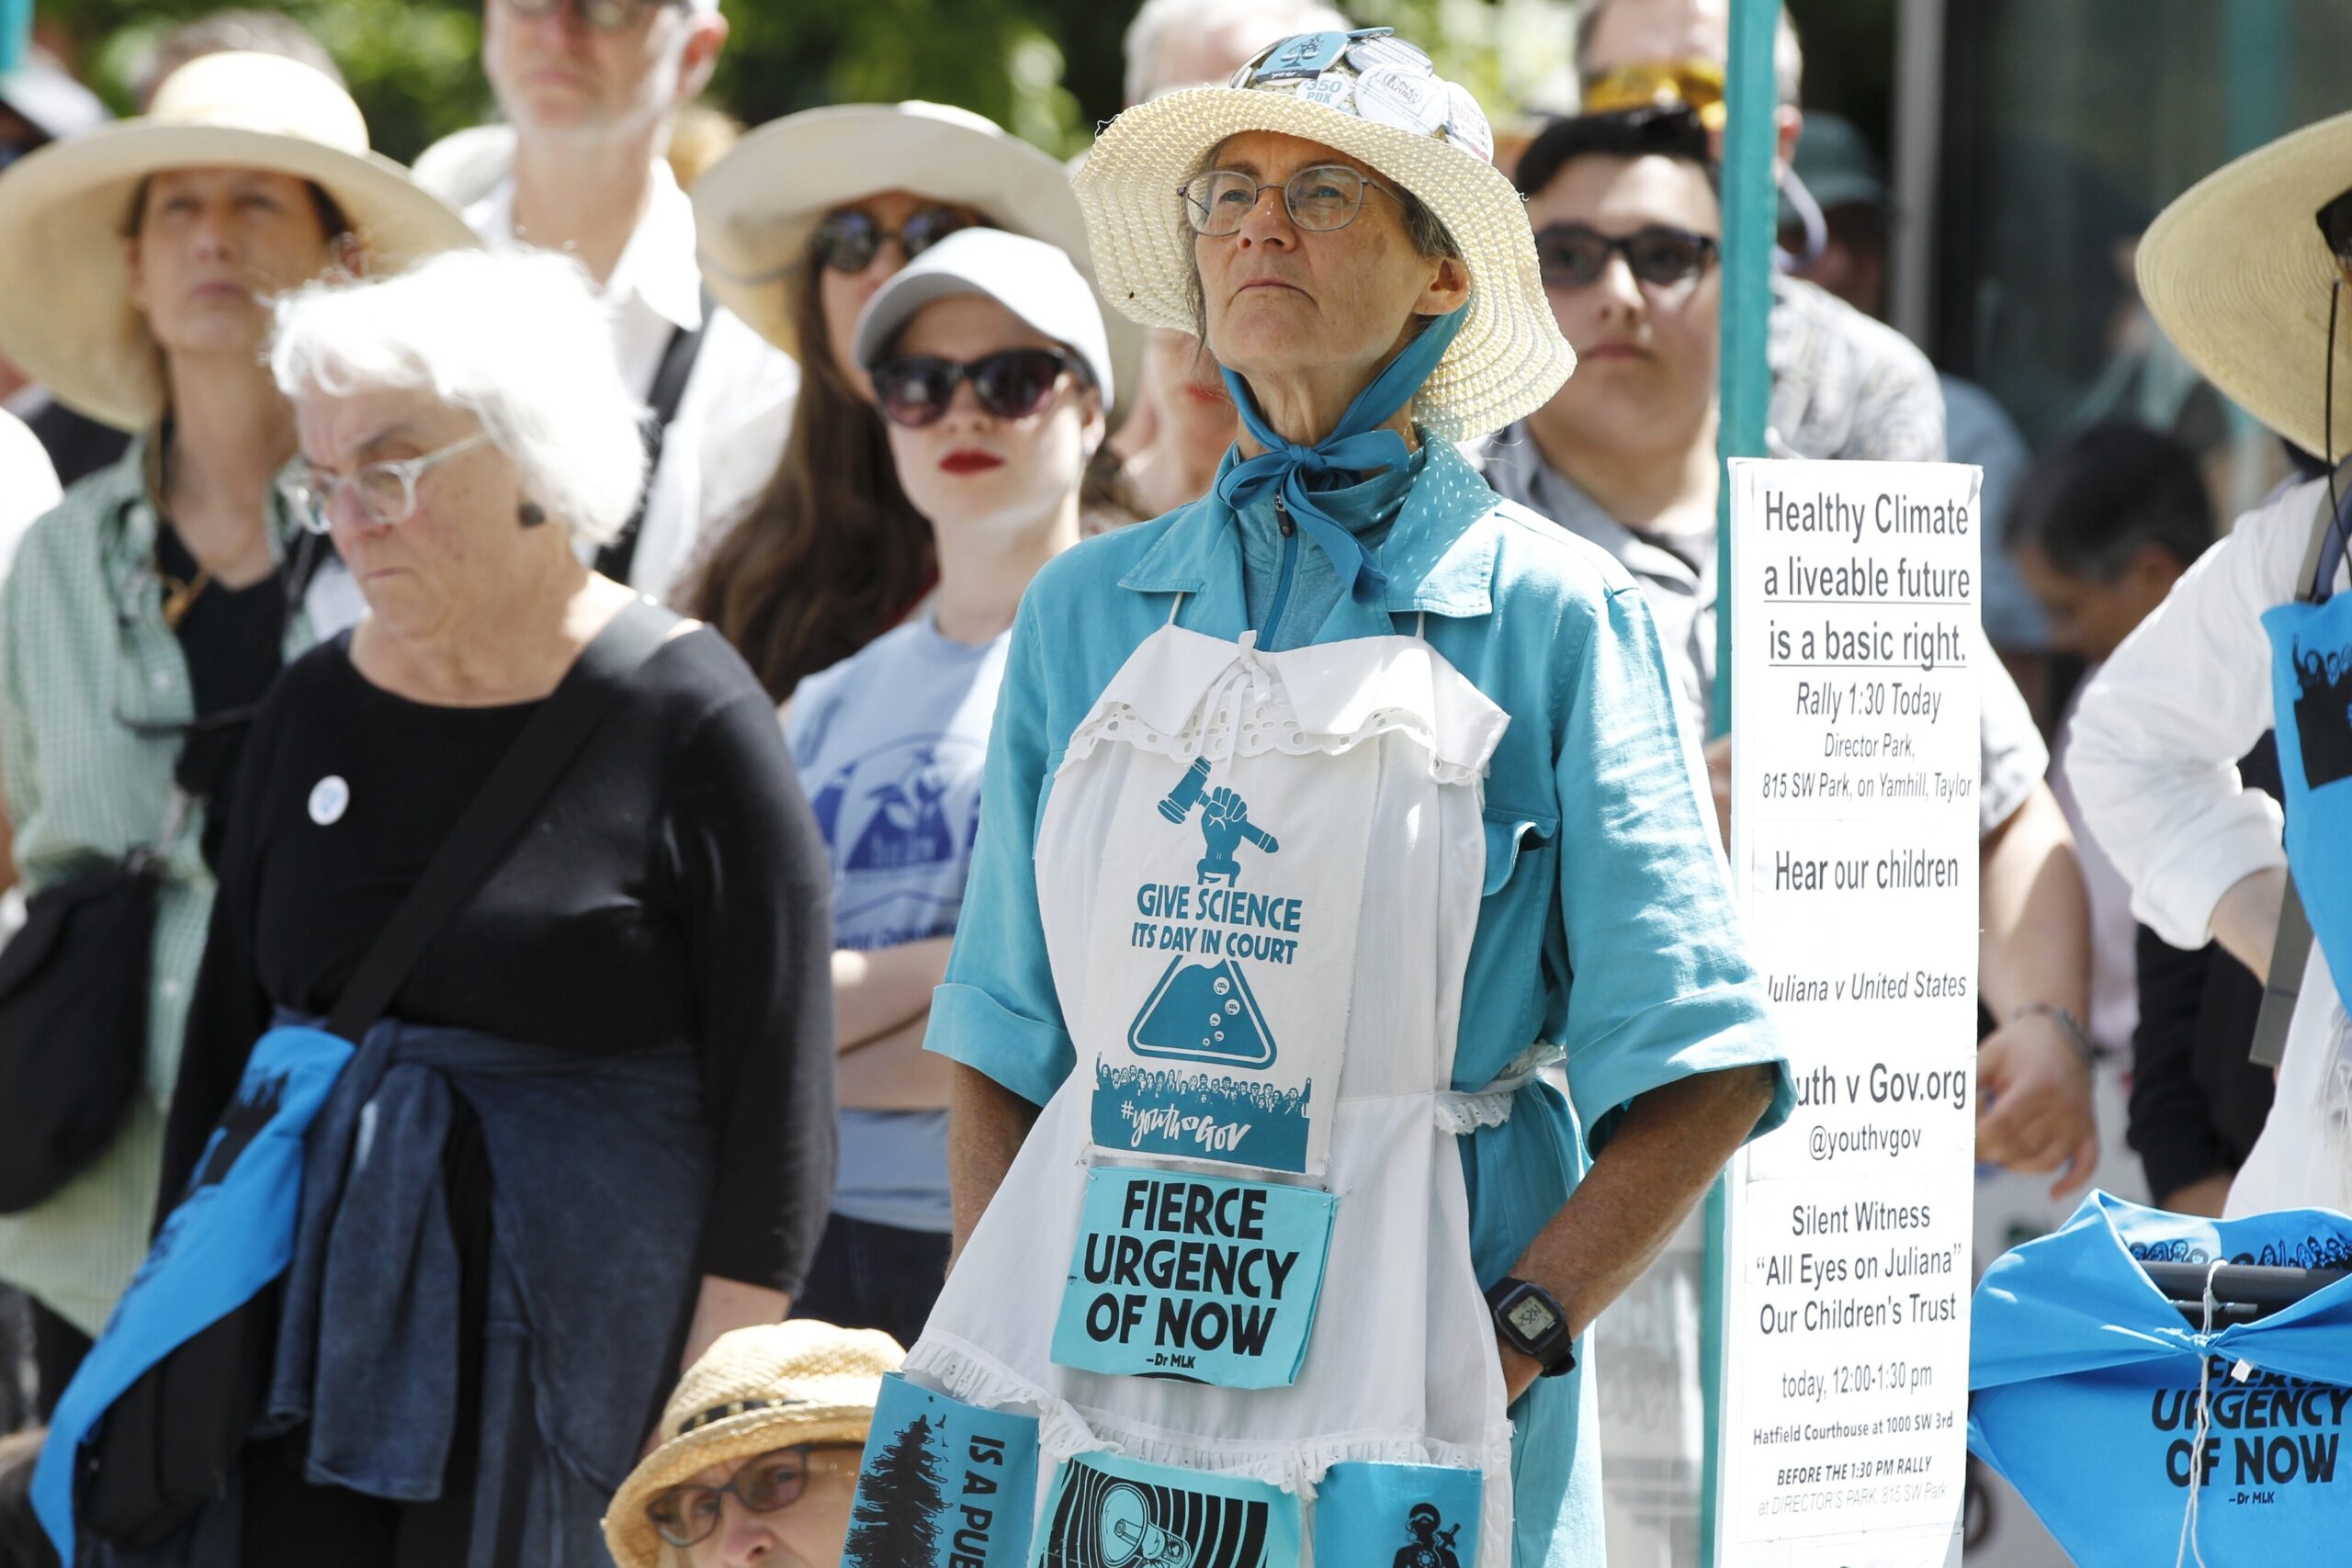 Supporters attend a rally Tuesday, June 4, 2019 for a group of young people who filed a lawsuit saying U.S. energy policies are causing climate change and hurting their future